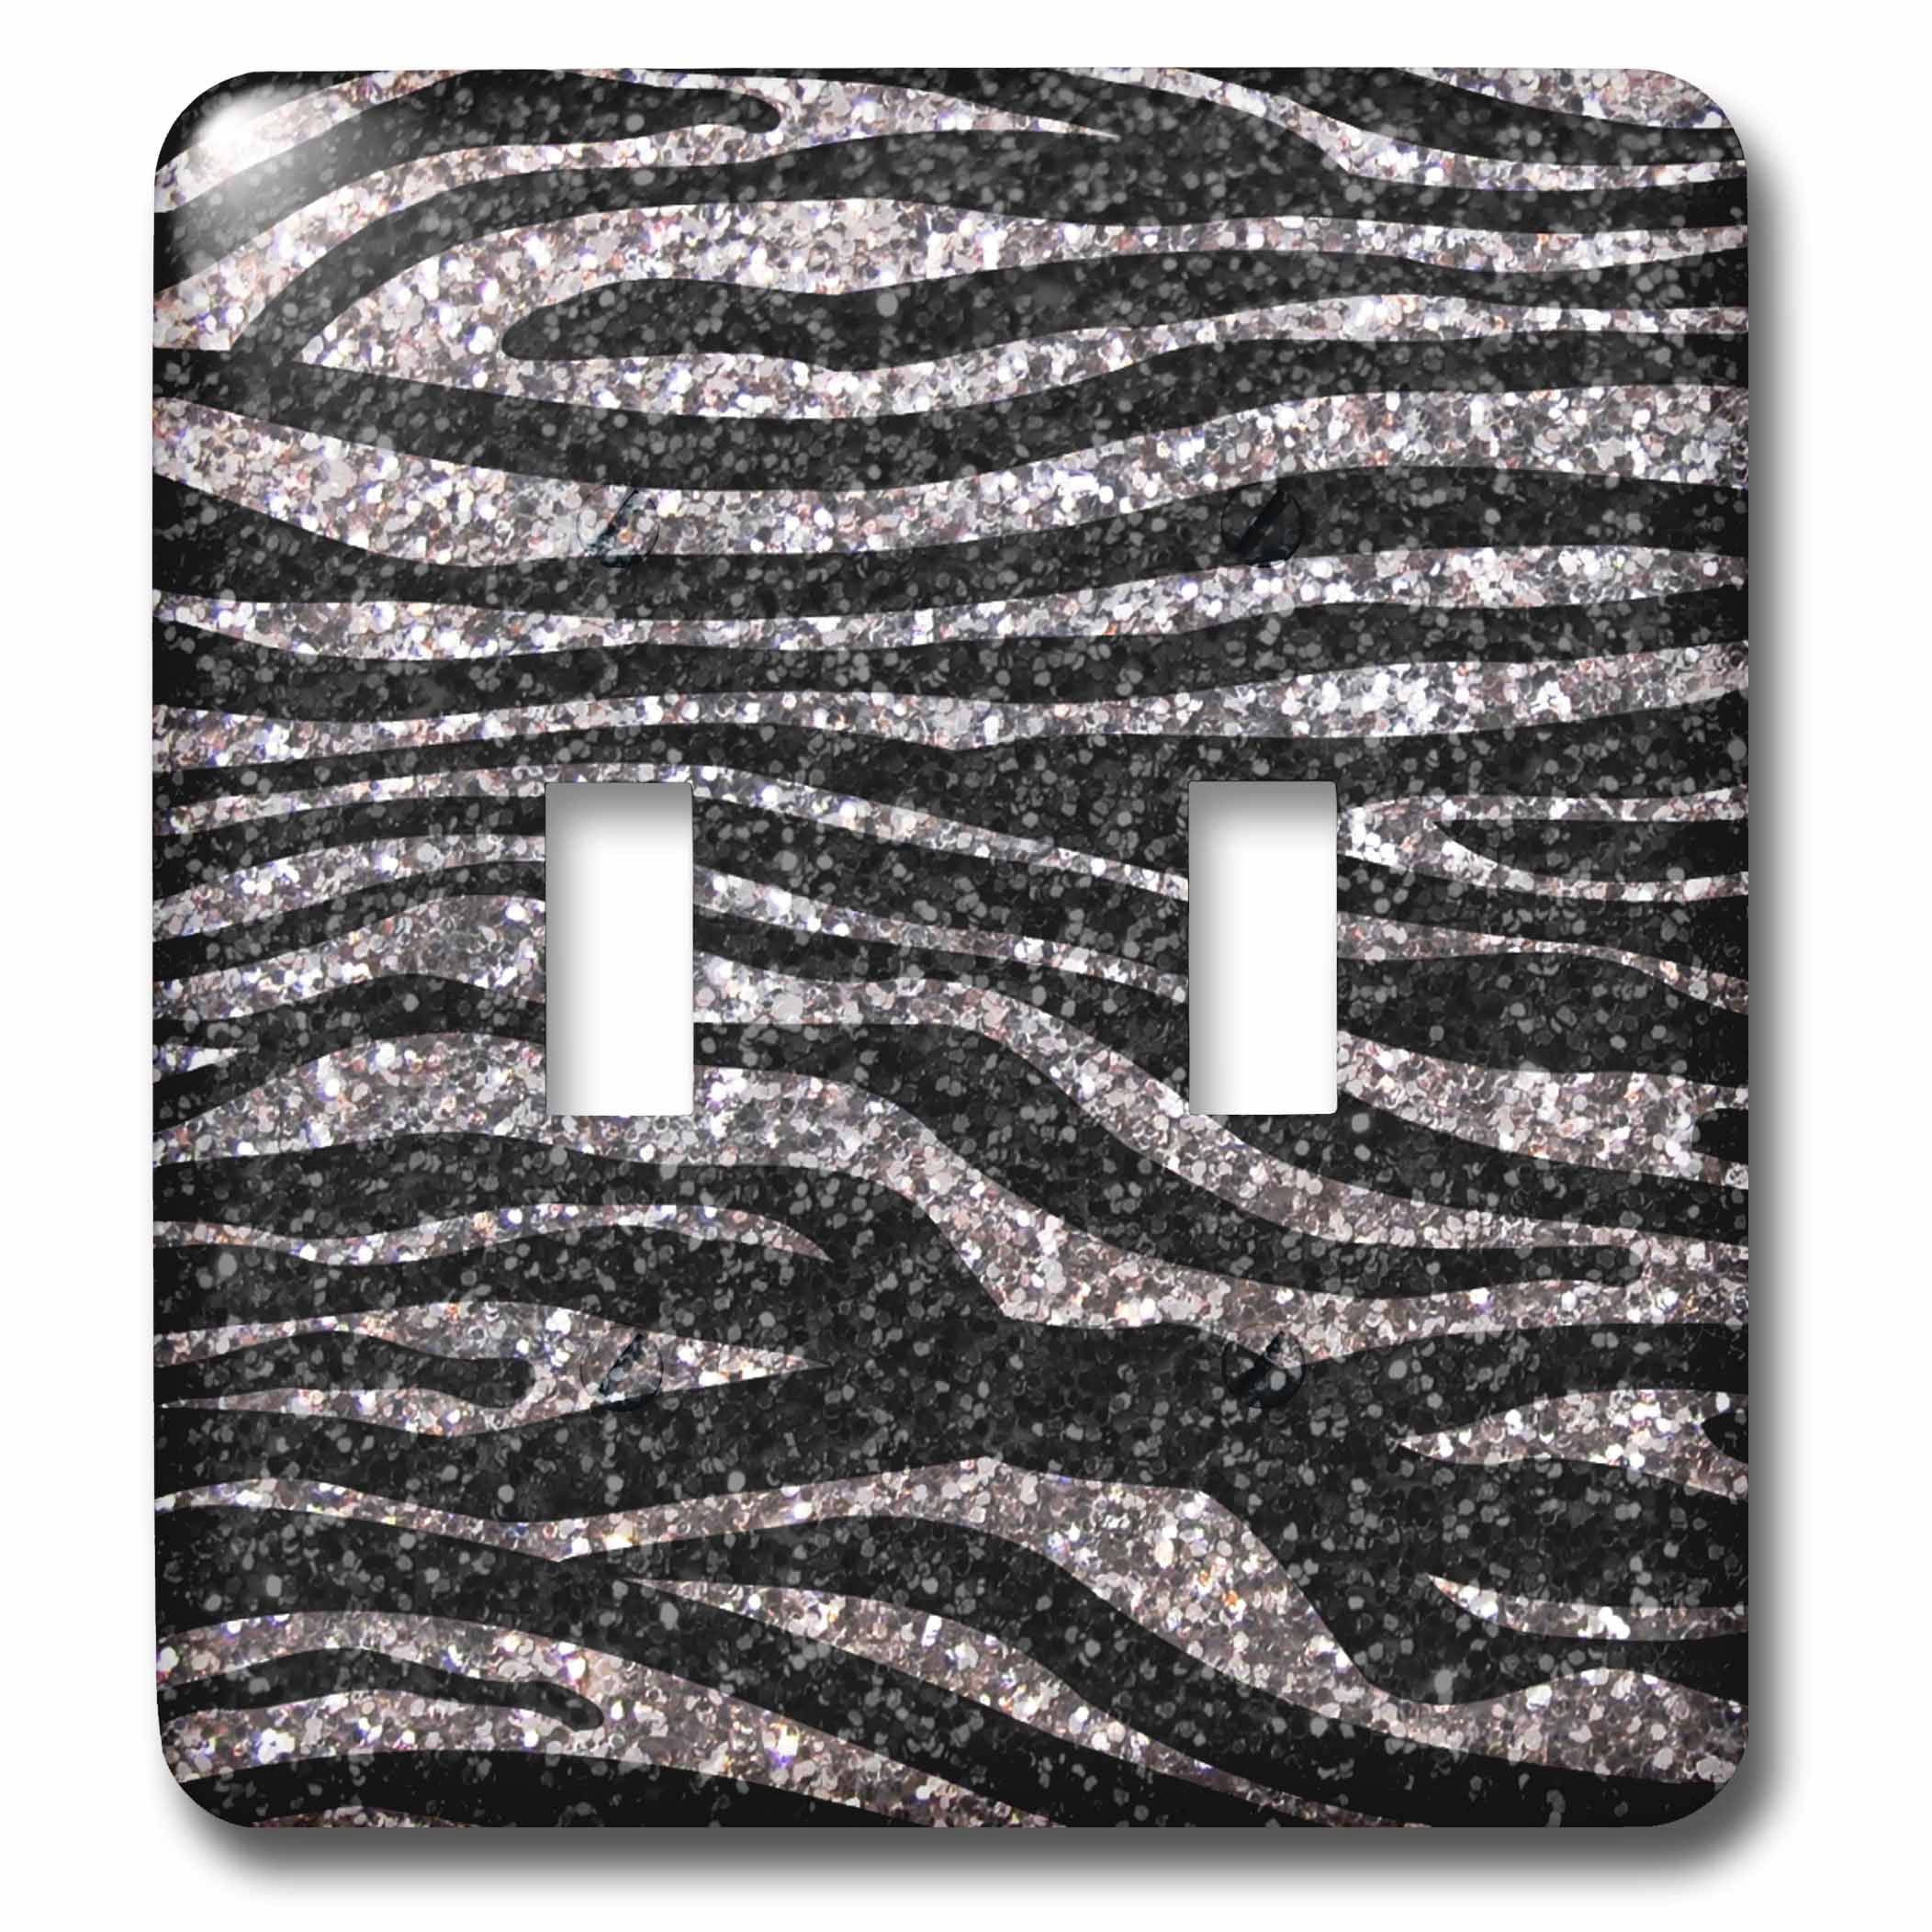 3dRose  lsp_113176_6 Silver and Black Zebra Print Faux Bling Photo Not Actual Glitter Fancy Diva Girly Sparkly Sparkles 2 Plug Outlet Cover